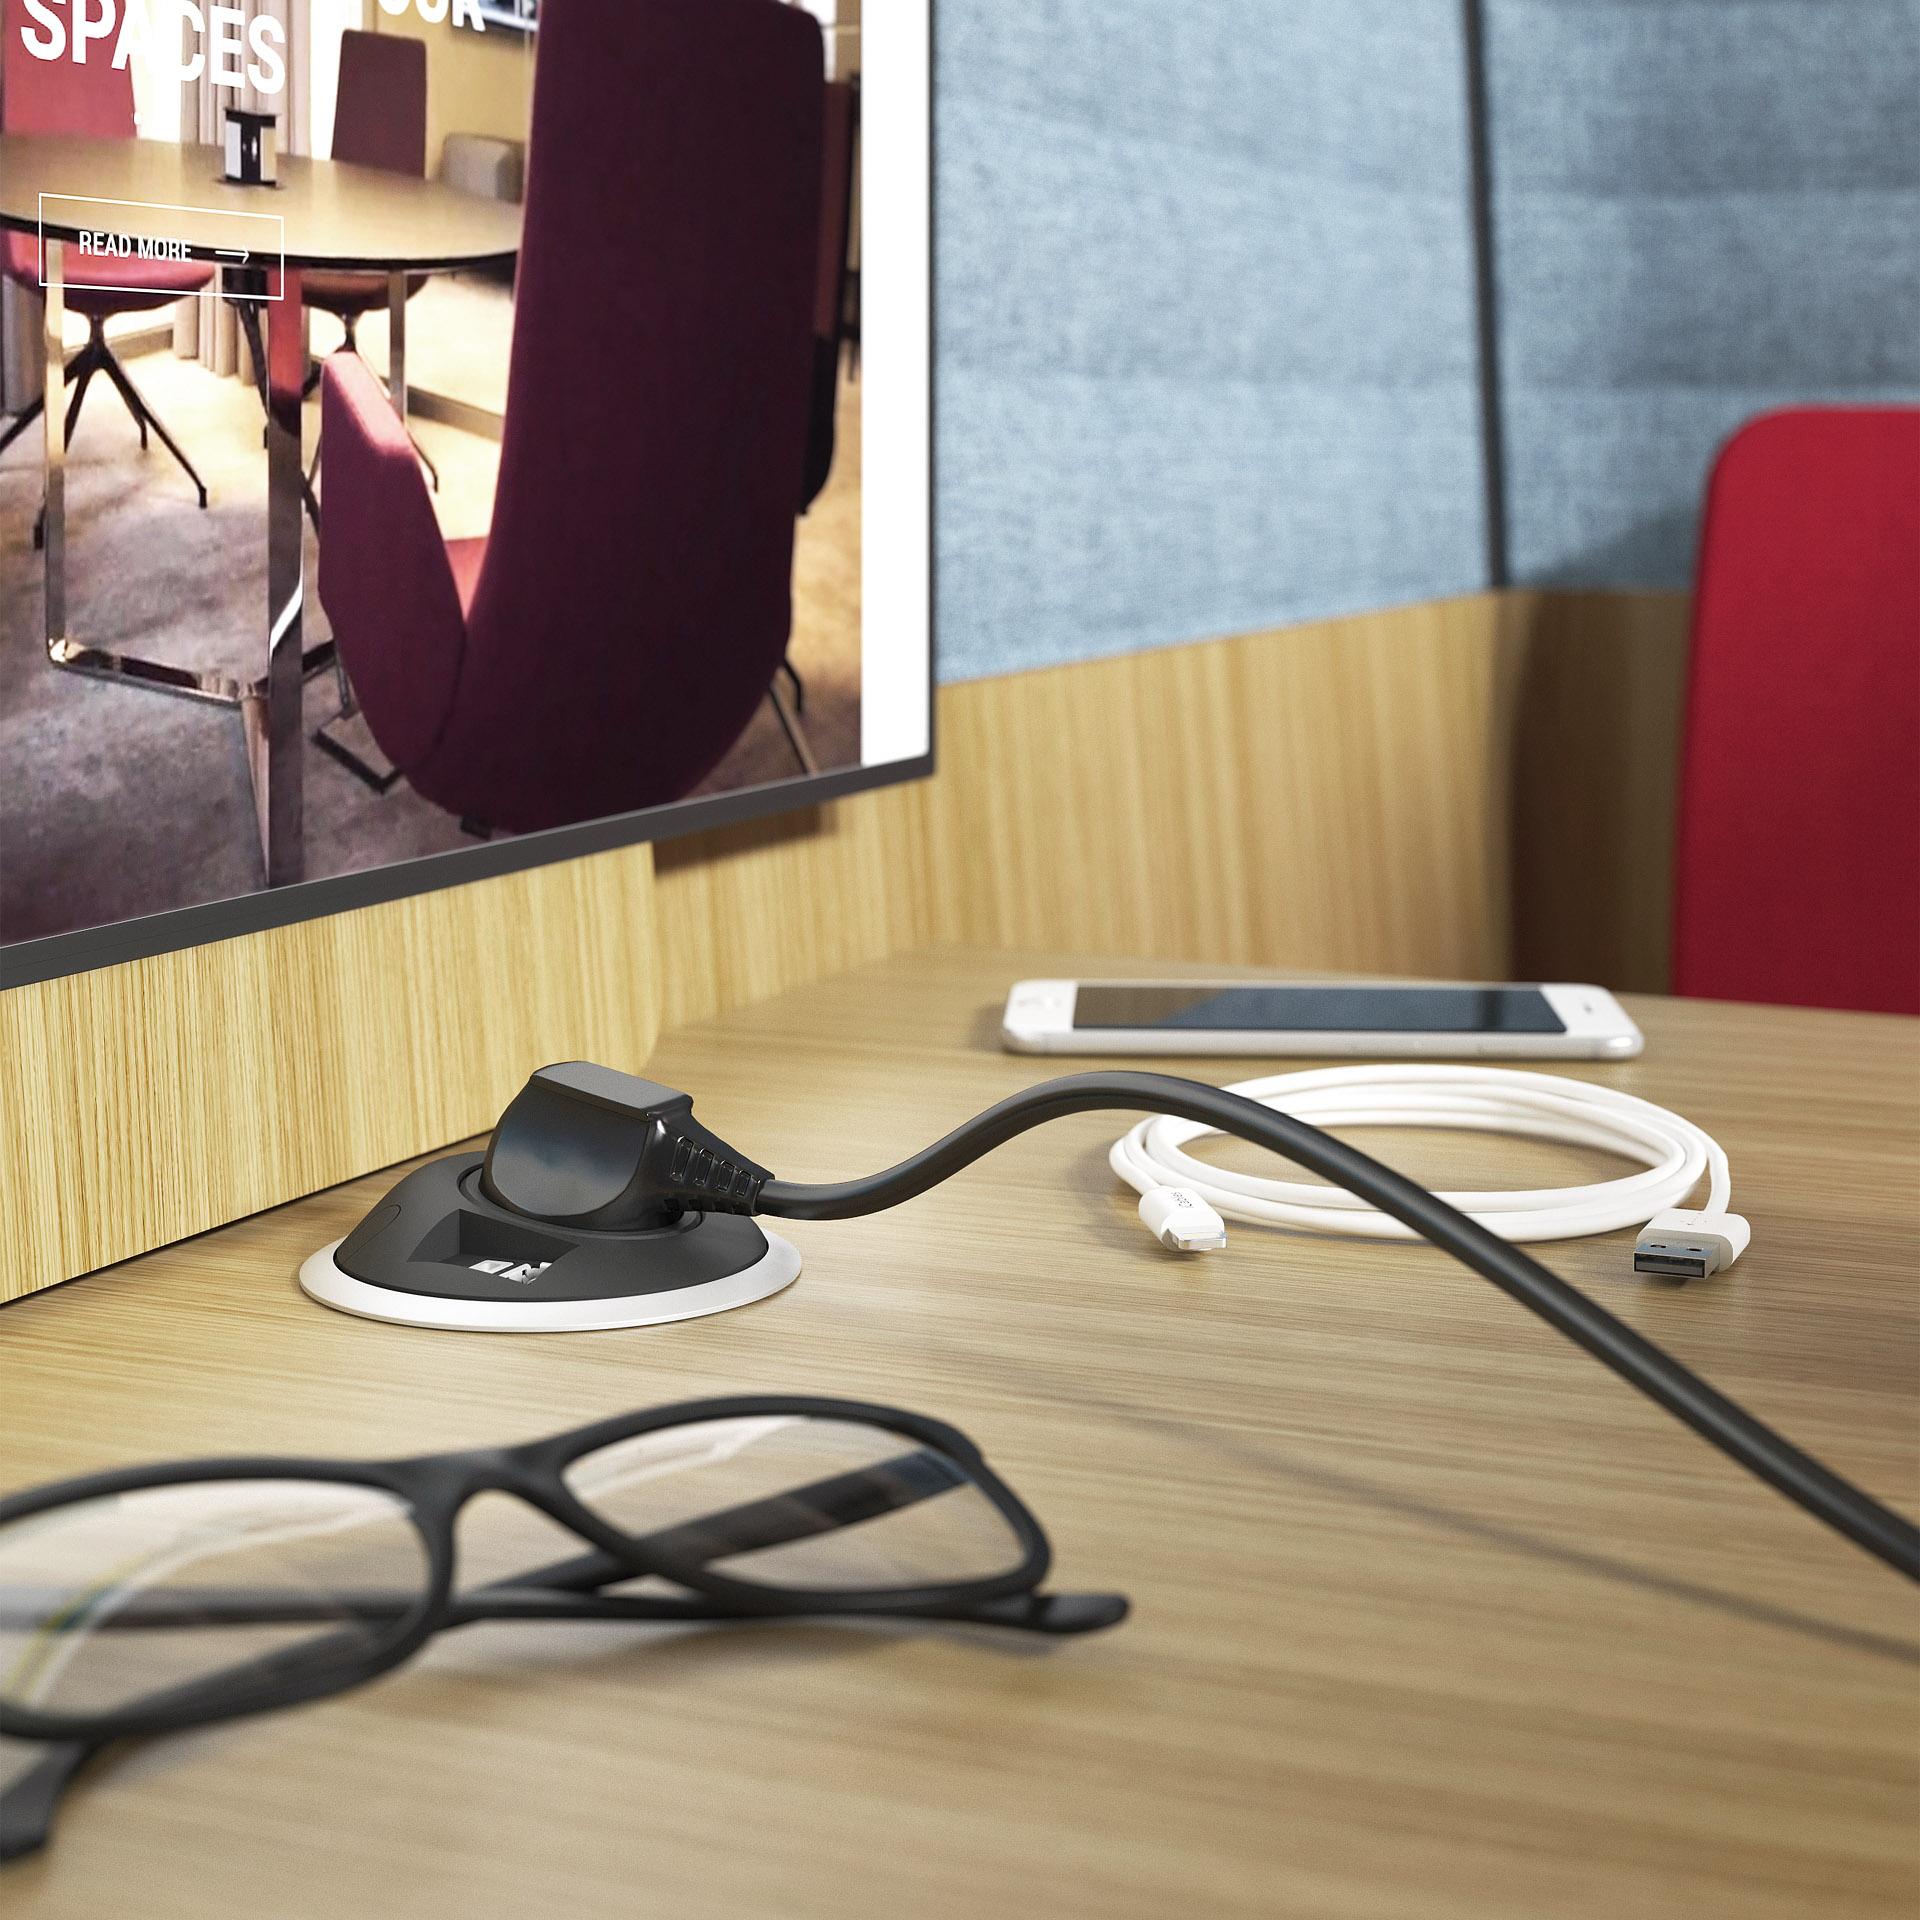 The meeting table option is equipped with a power and charge for any devices